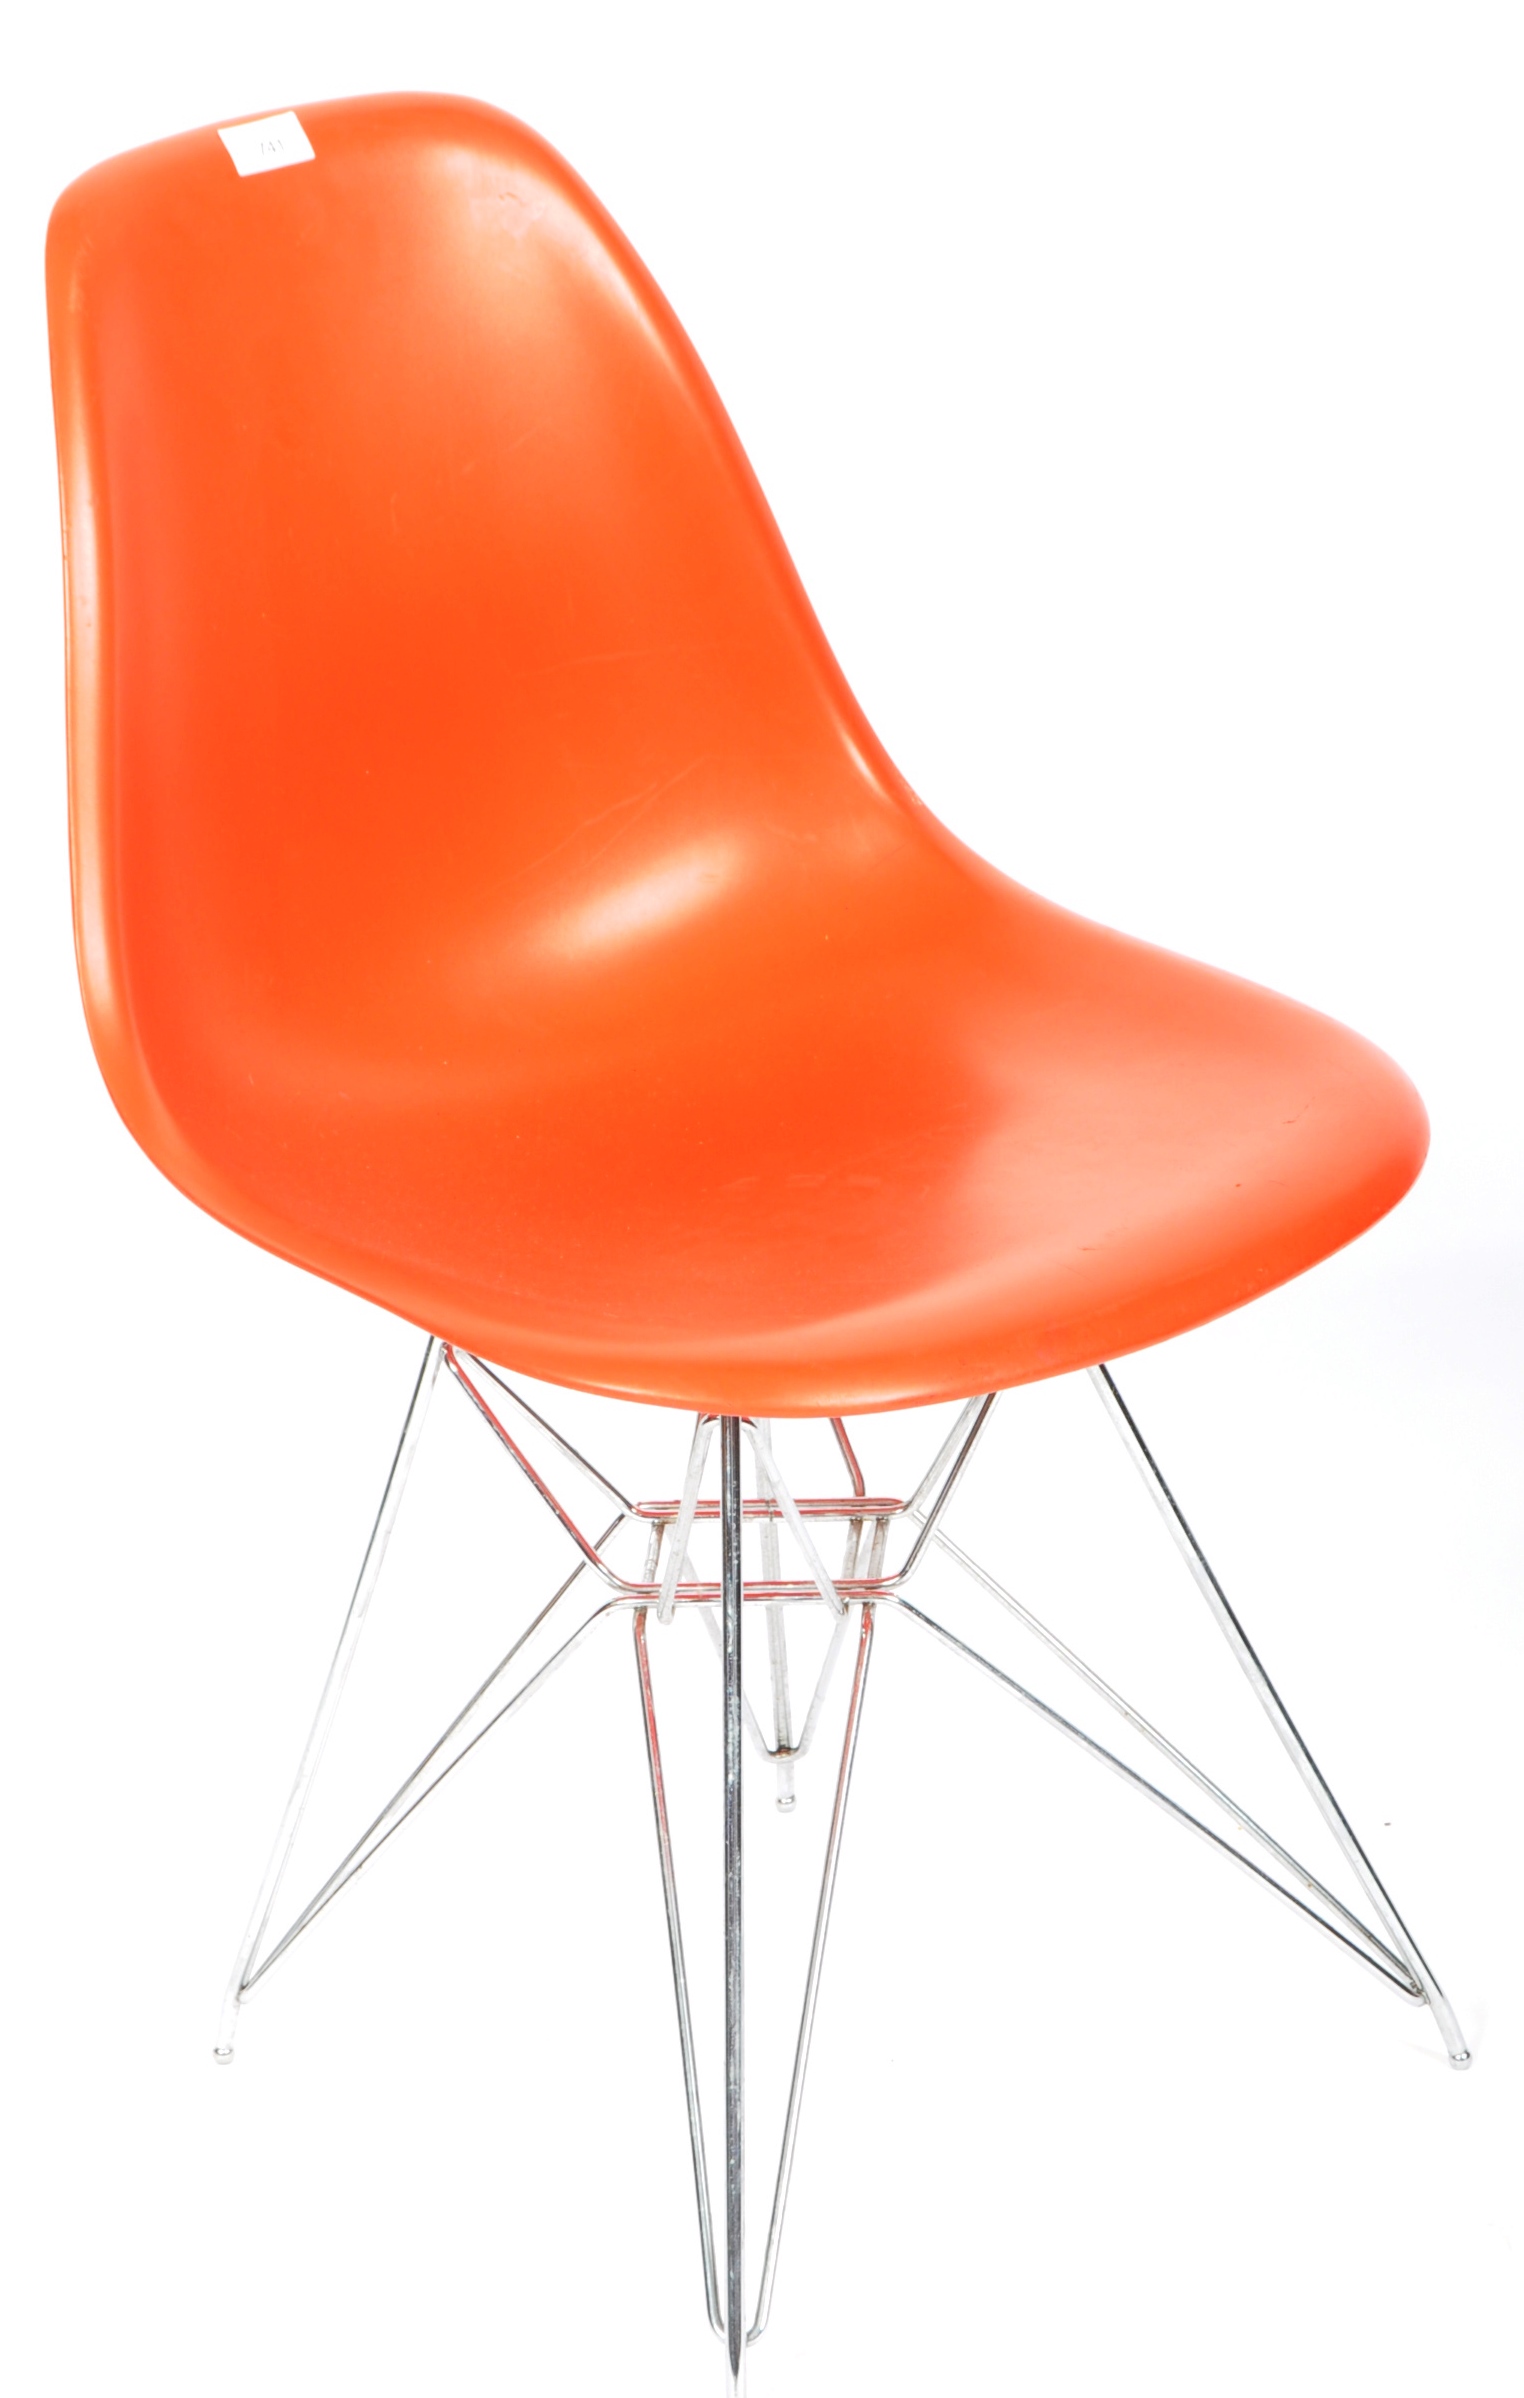 CHARLES & RAY EAMES FOR VITRA - DSR EAMES PLASTIC CHAIR - Image 2 of 10